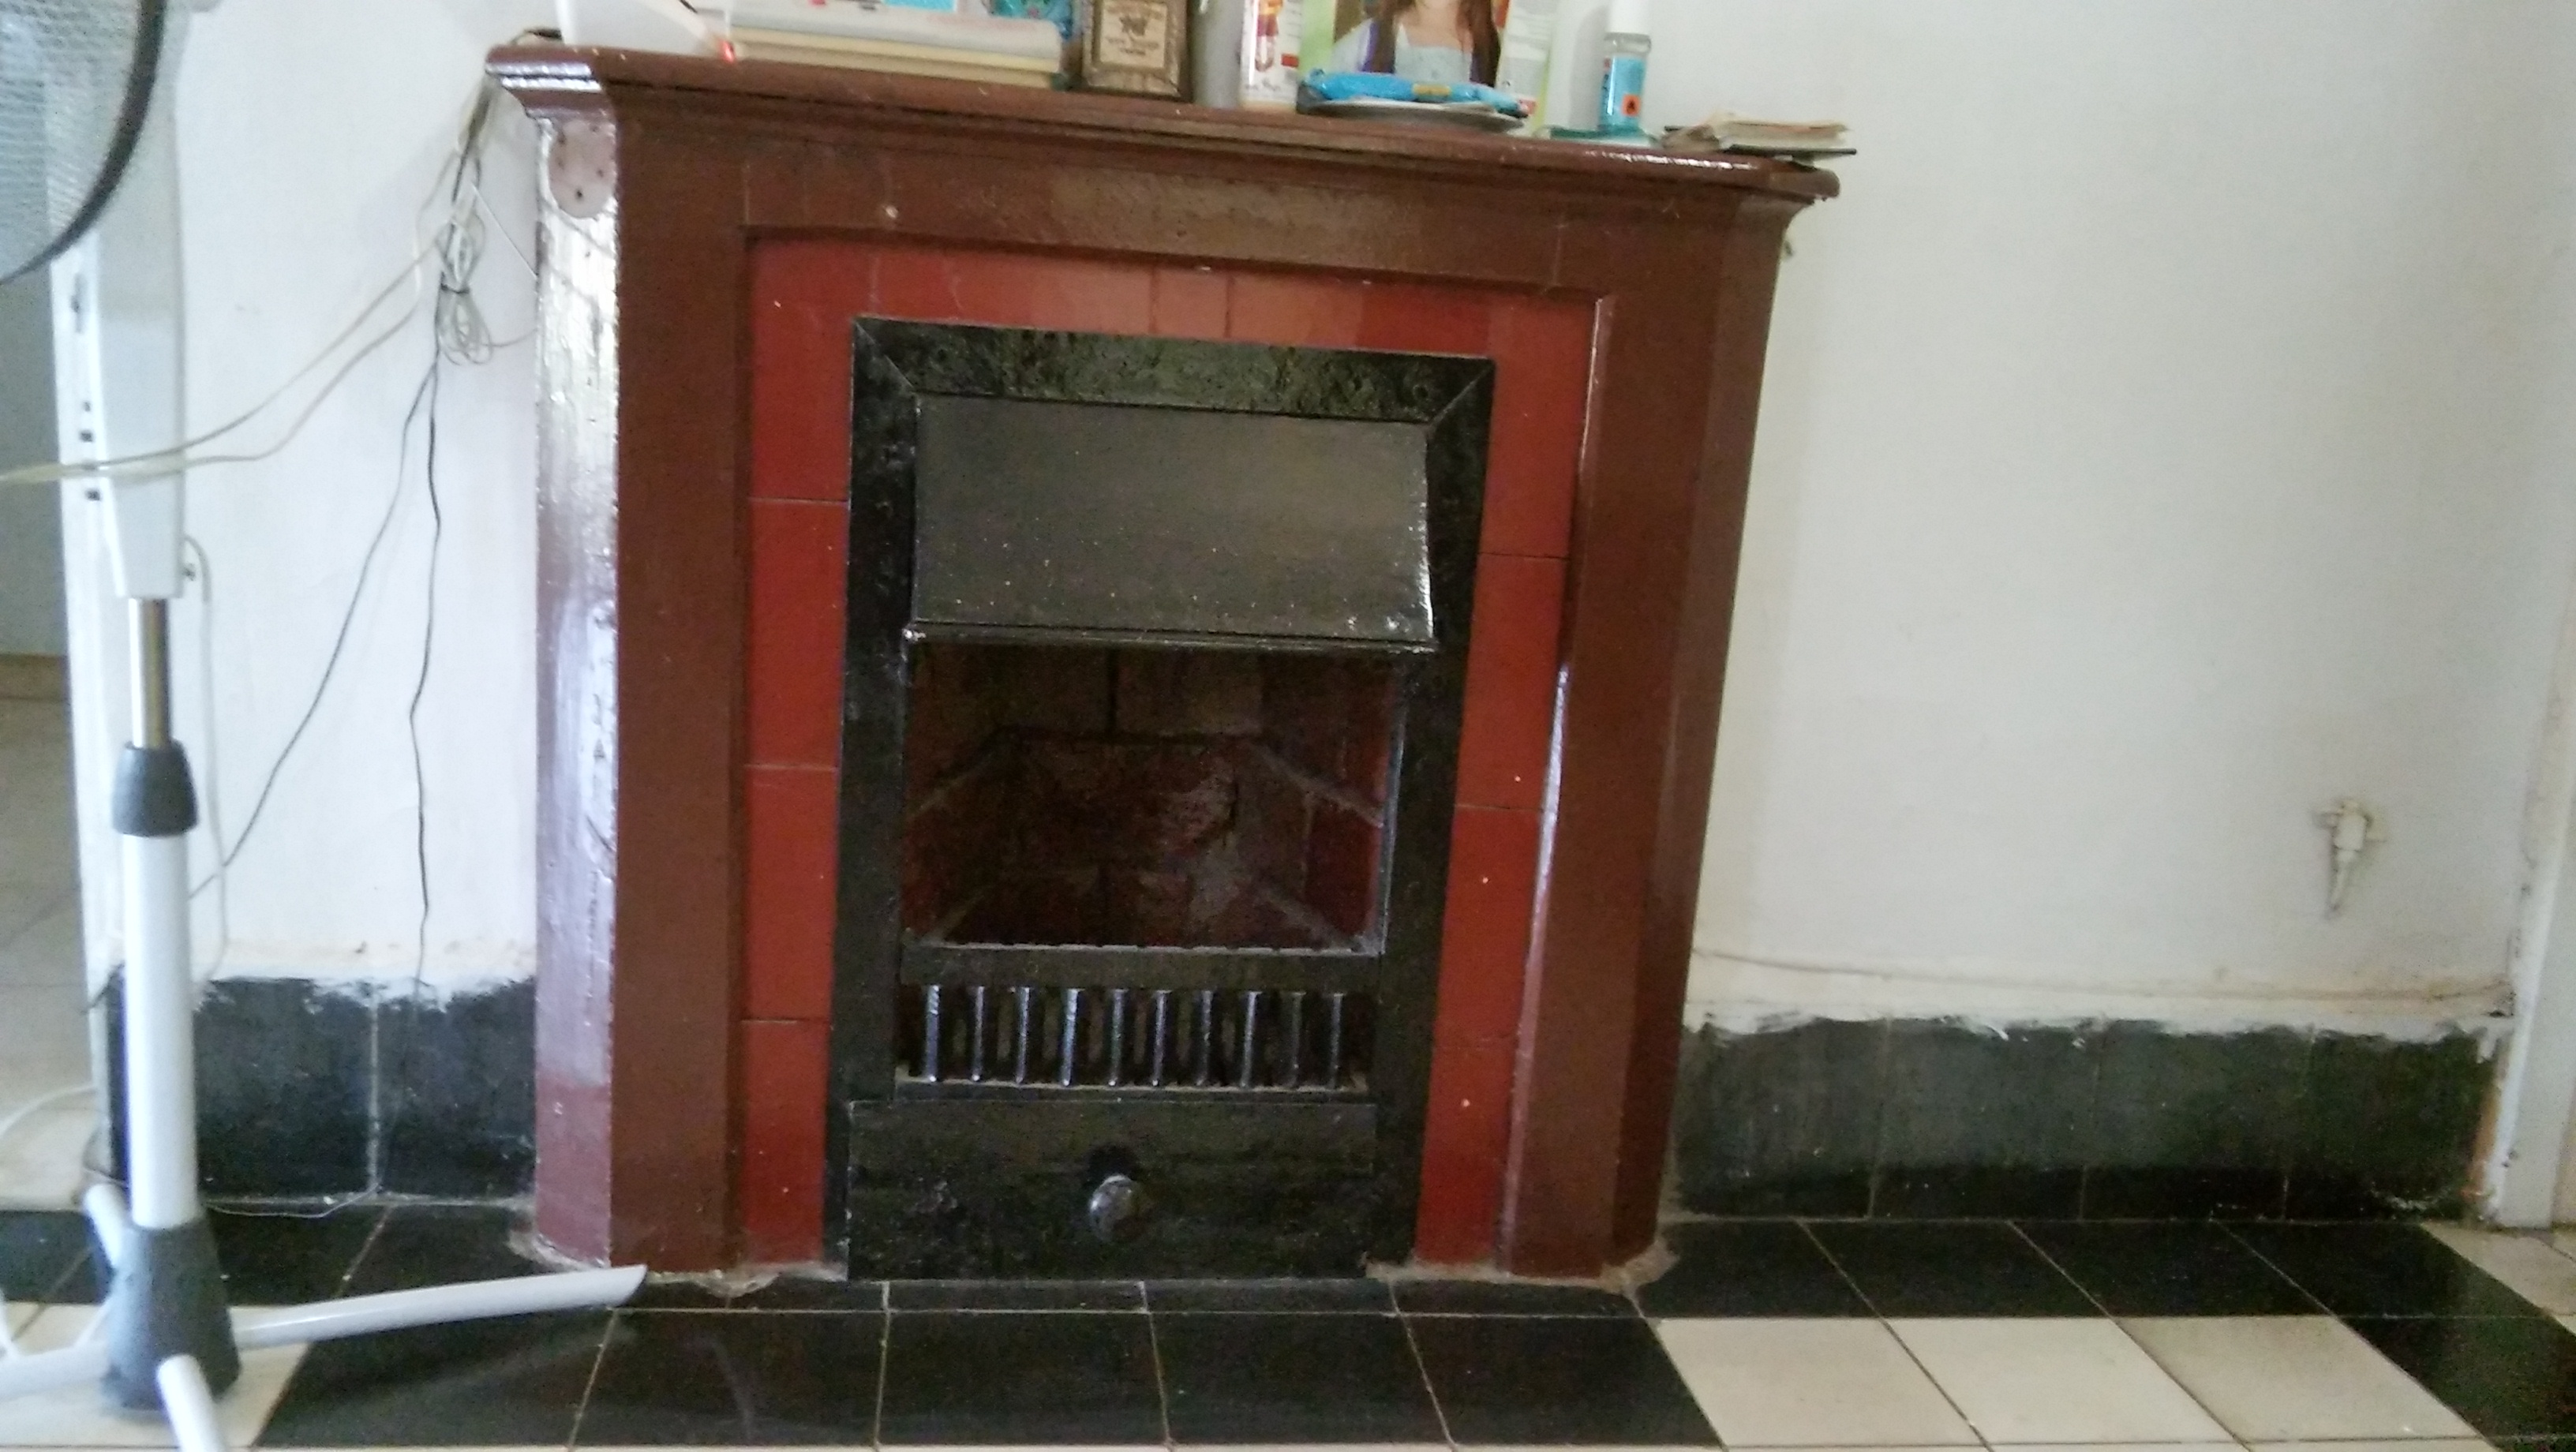 How to Tile Around Fireplace Inspirational File Petach Tikva Old Train Station 12 Wikimedia Mons